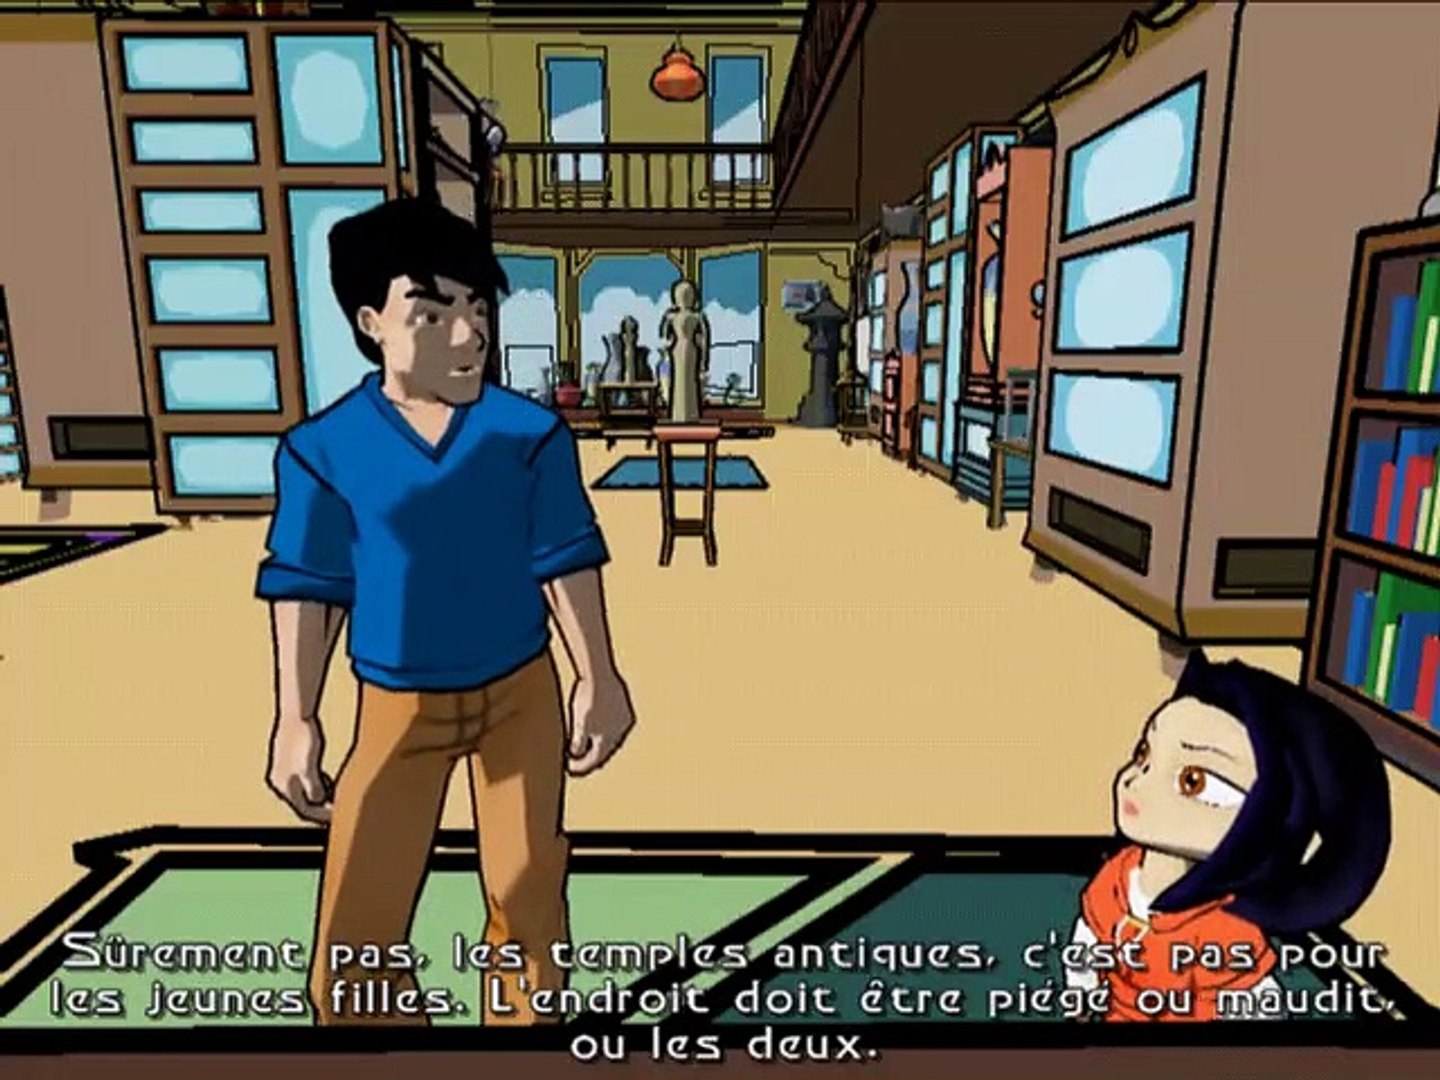 Jackie Chan Adventures online multiplayer - ps2 - Vidéo Dailymotion